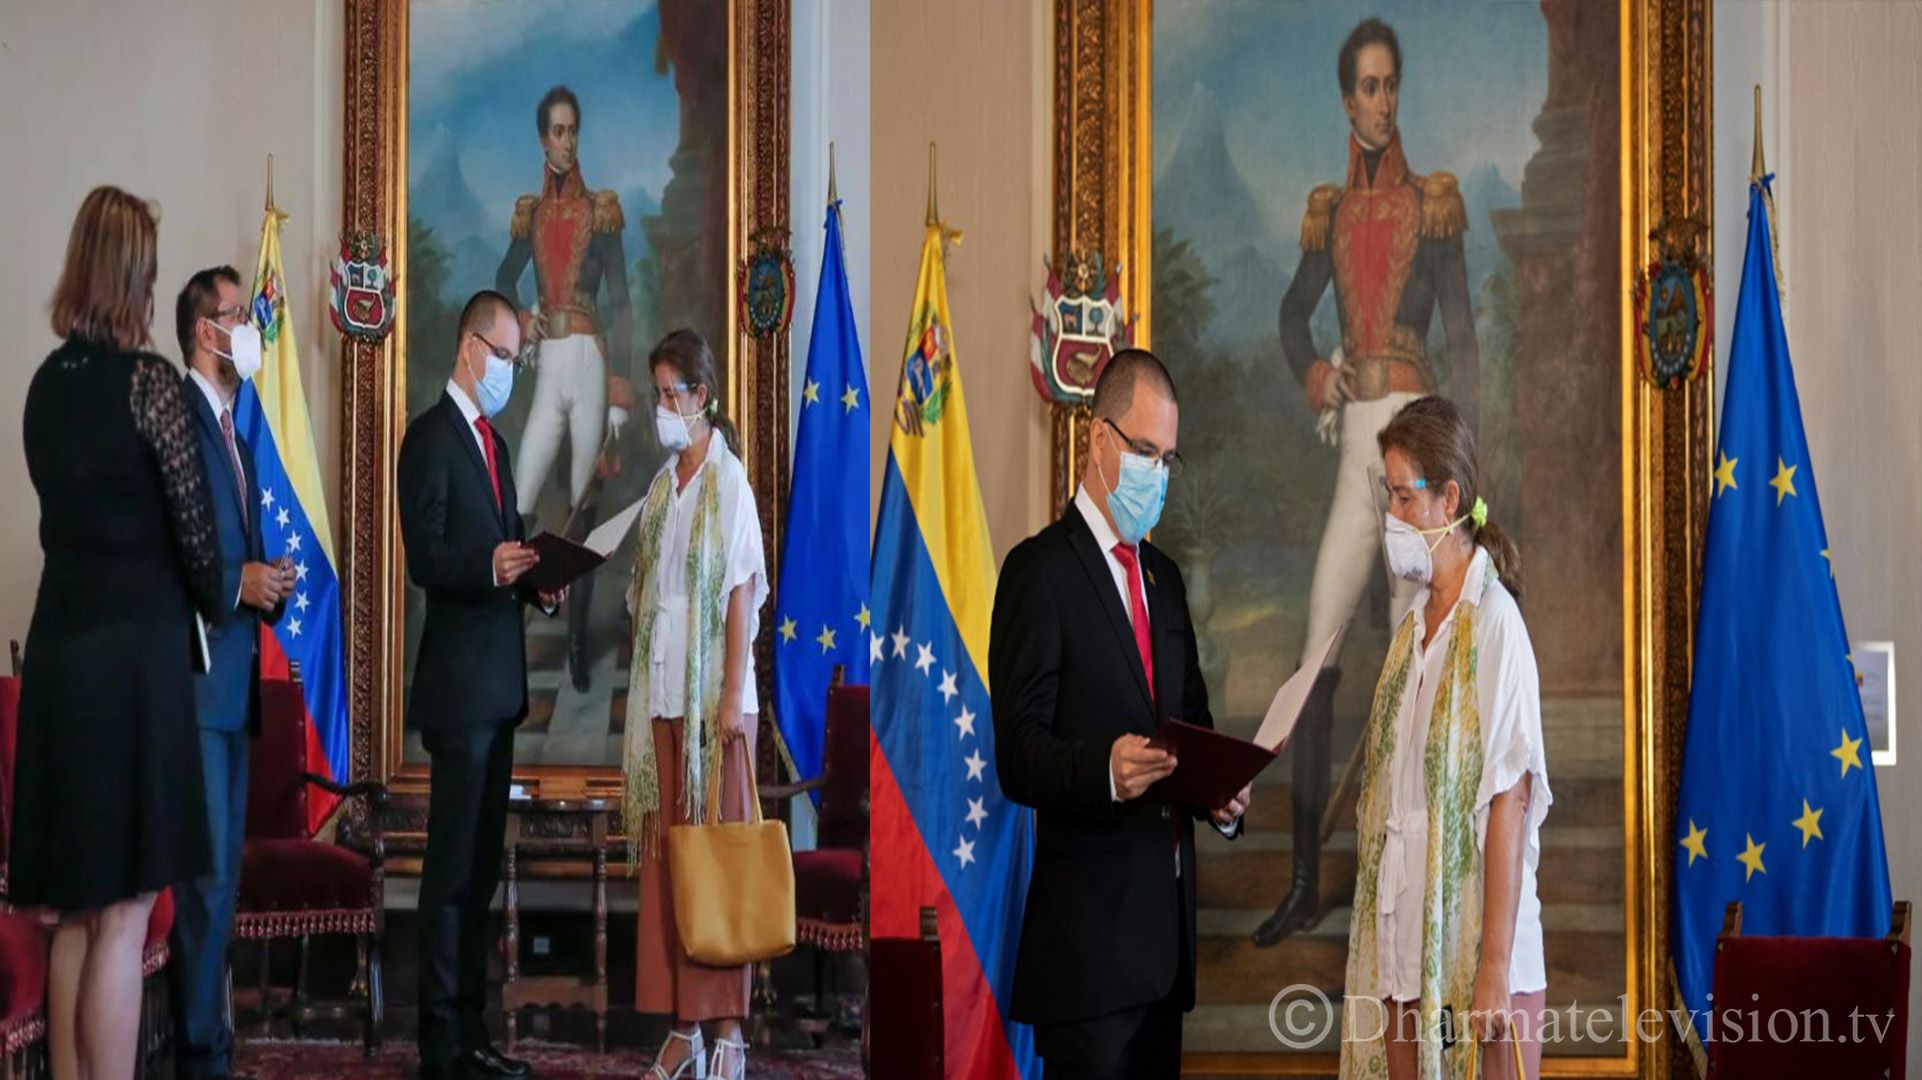 Venezuela orders EU ambassador to leave the country within 72 hours